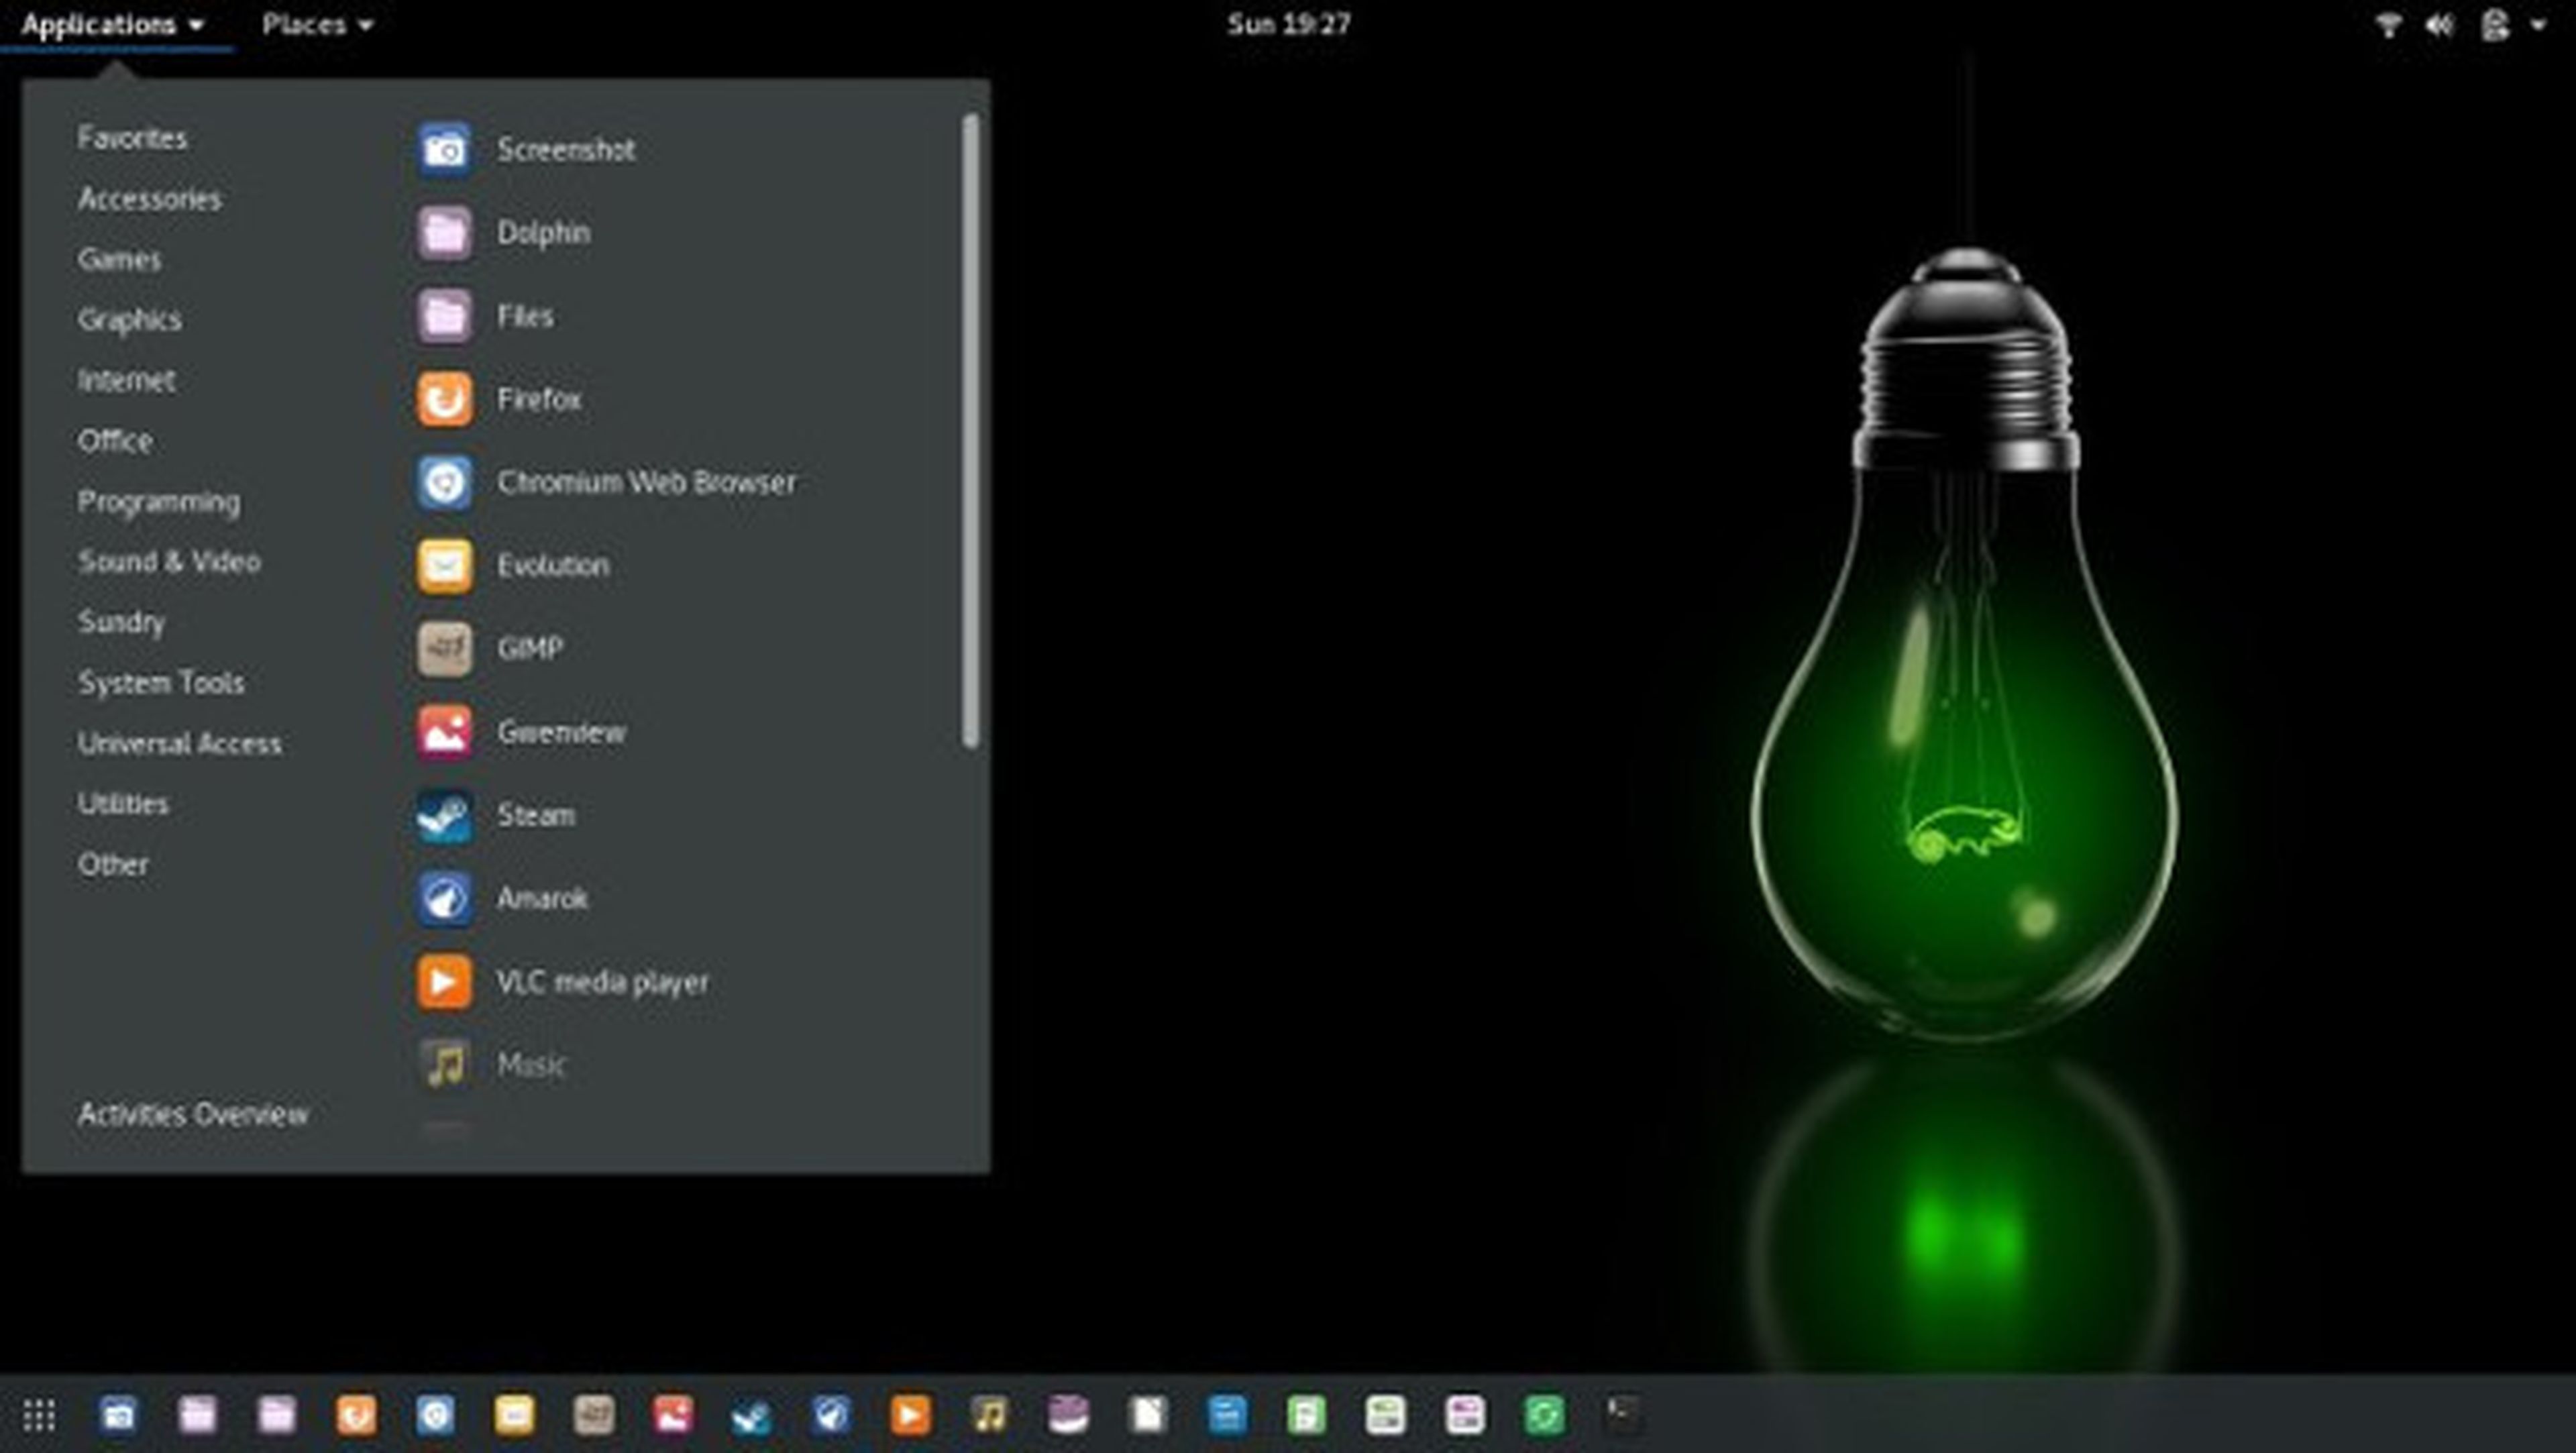 openSUSE.